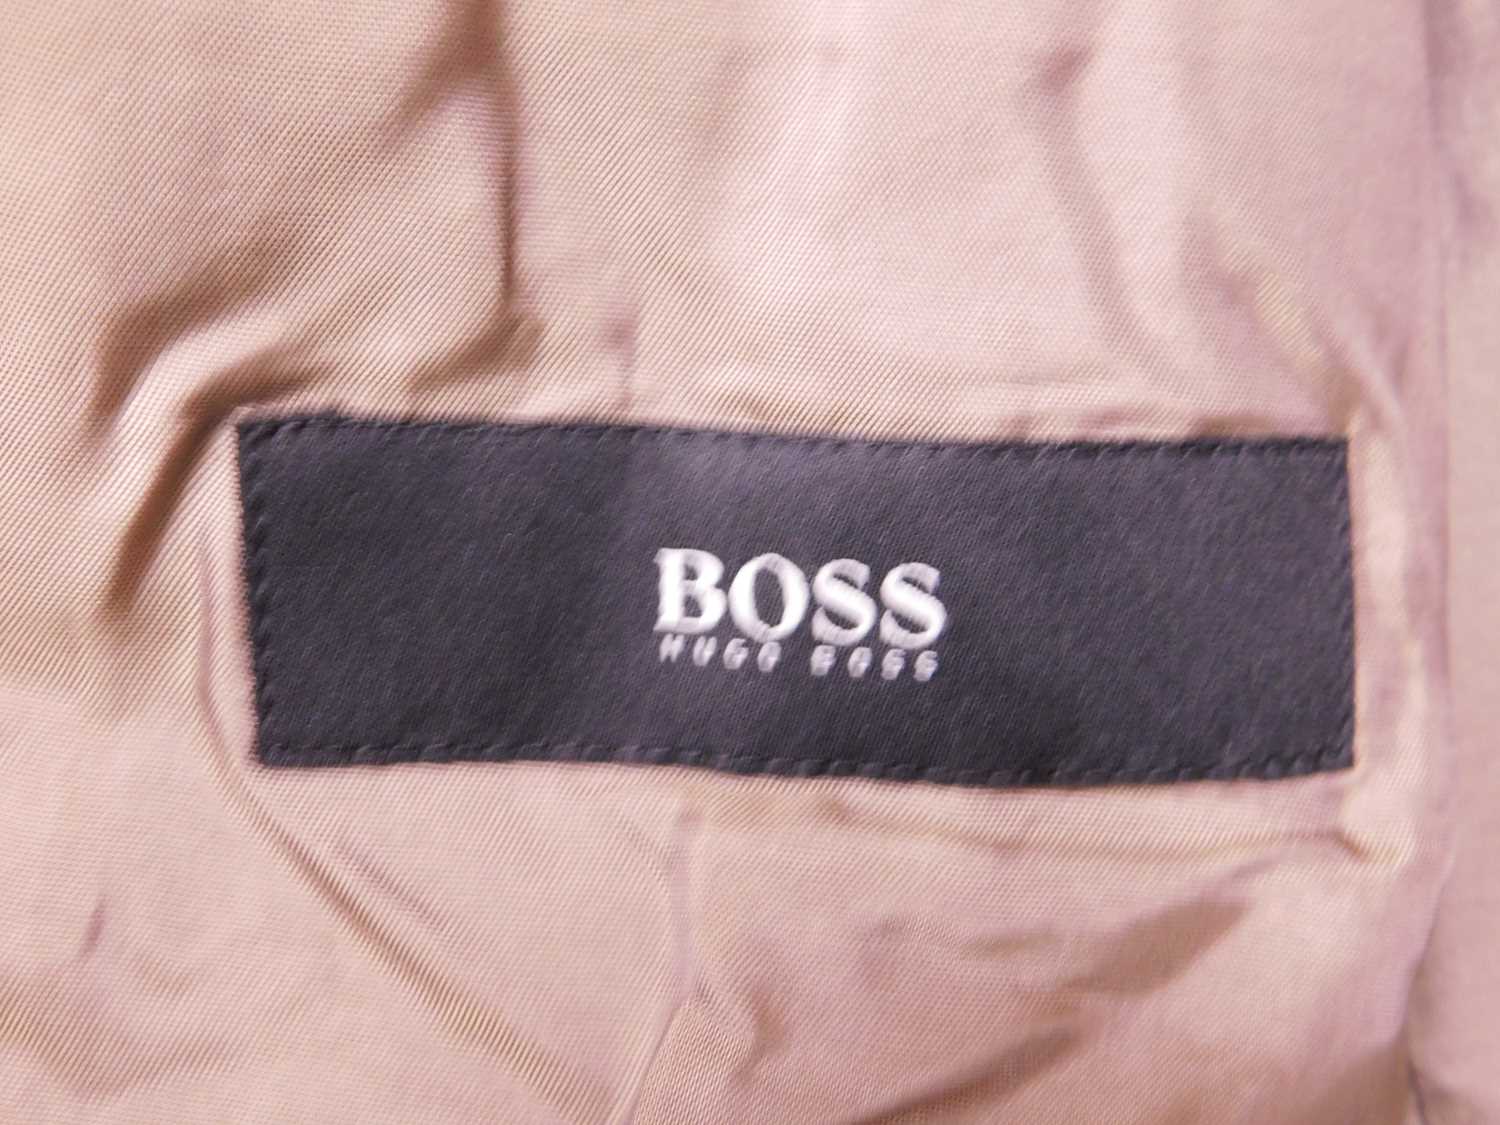 A Bertolucci brown velvet jacket by Hugo Boss, size 52 together with a Paul Smith black blazer, size - Image 2 of 3